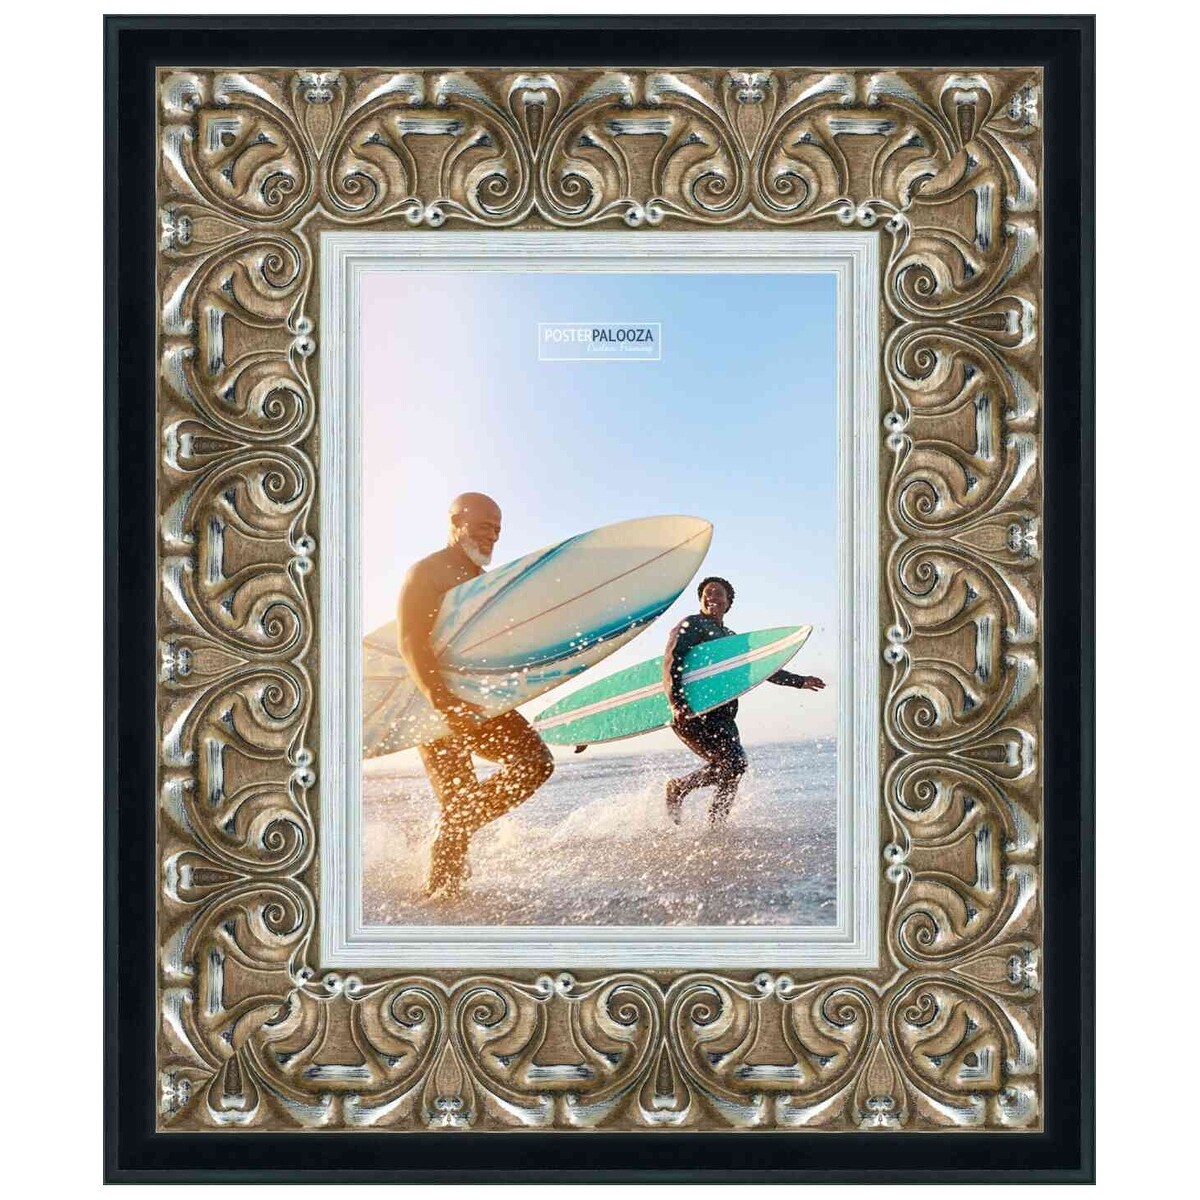 30x20 Frame Silver Ornate Antique Solid Wood Picture Frame - UV Acrylic, Foam Board Backing, & Hanging Hardware Included